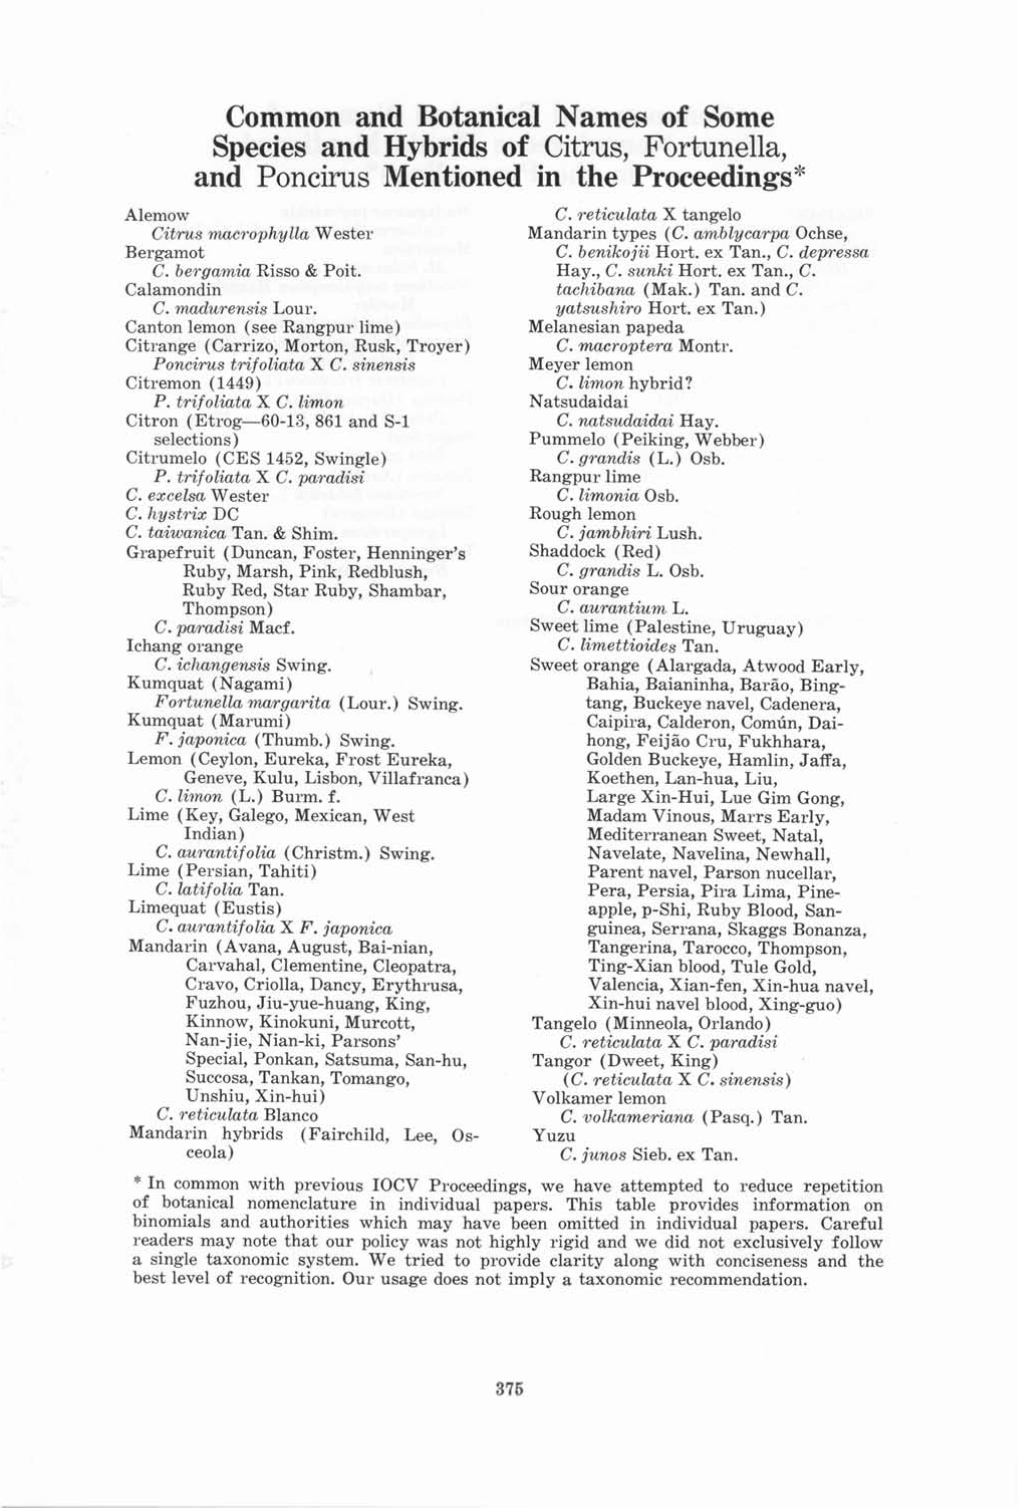 Common and Botanical Names of Some Species and Hybrids of Citrus, Fortunella, and Poncirus Mentioned in the Proceedings* Alemow C